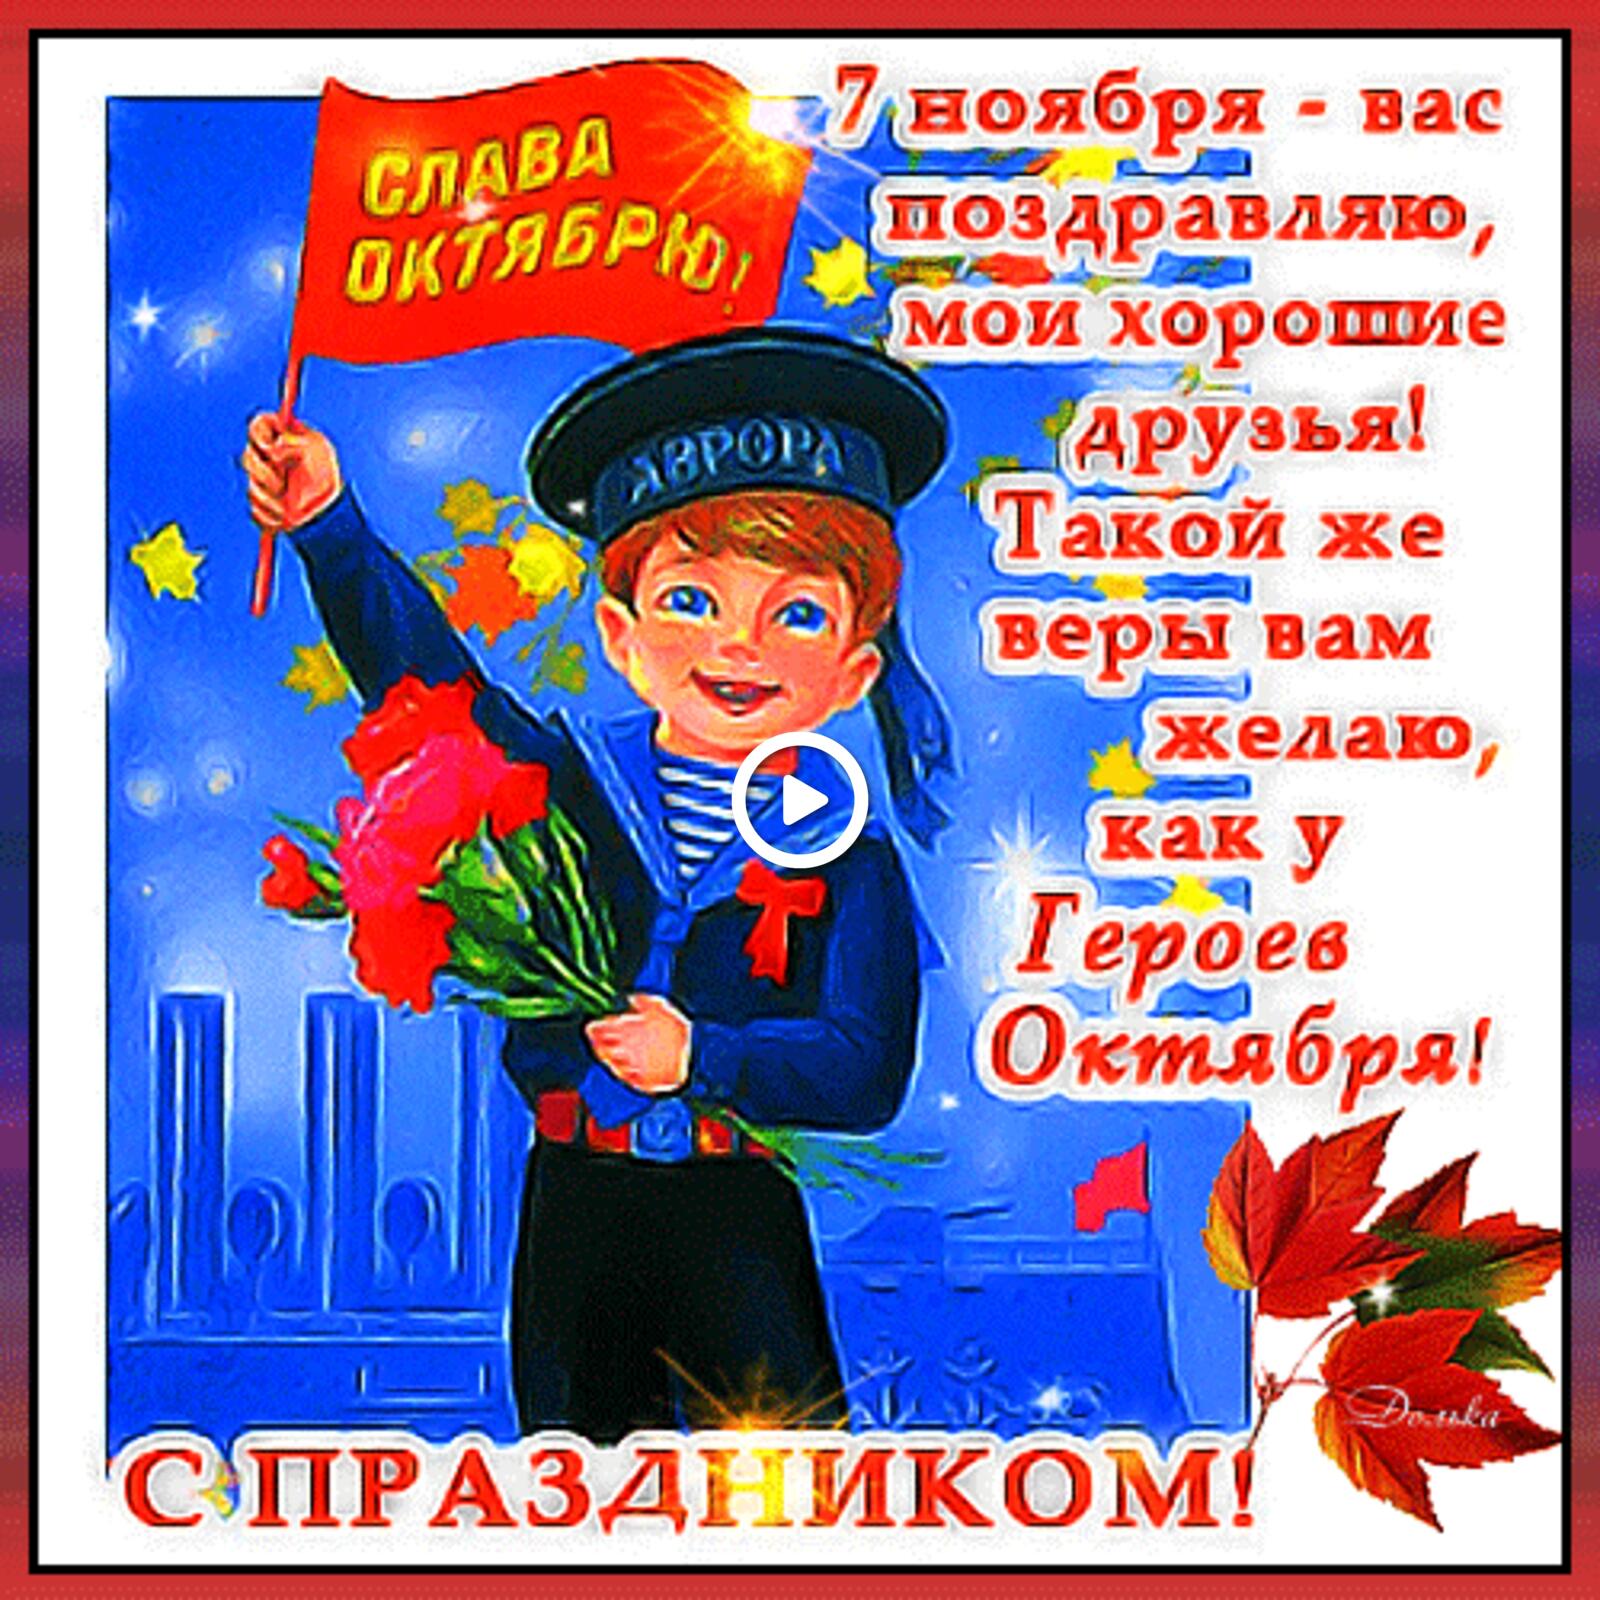 A postcard on the subject of november 7 revolution a boy for free